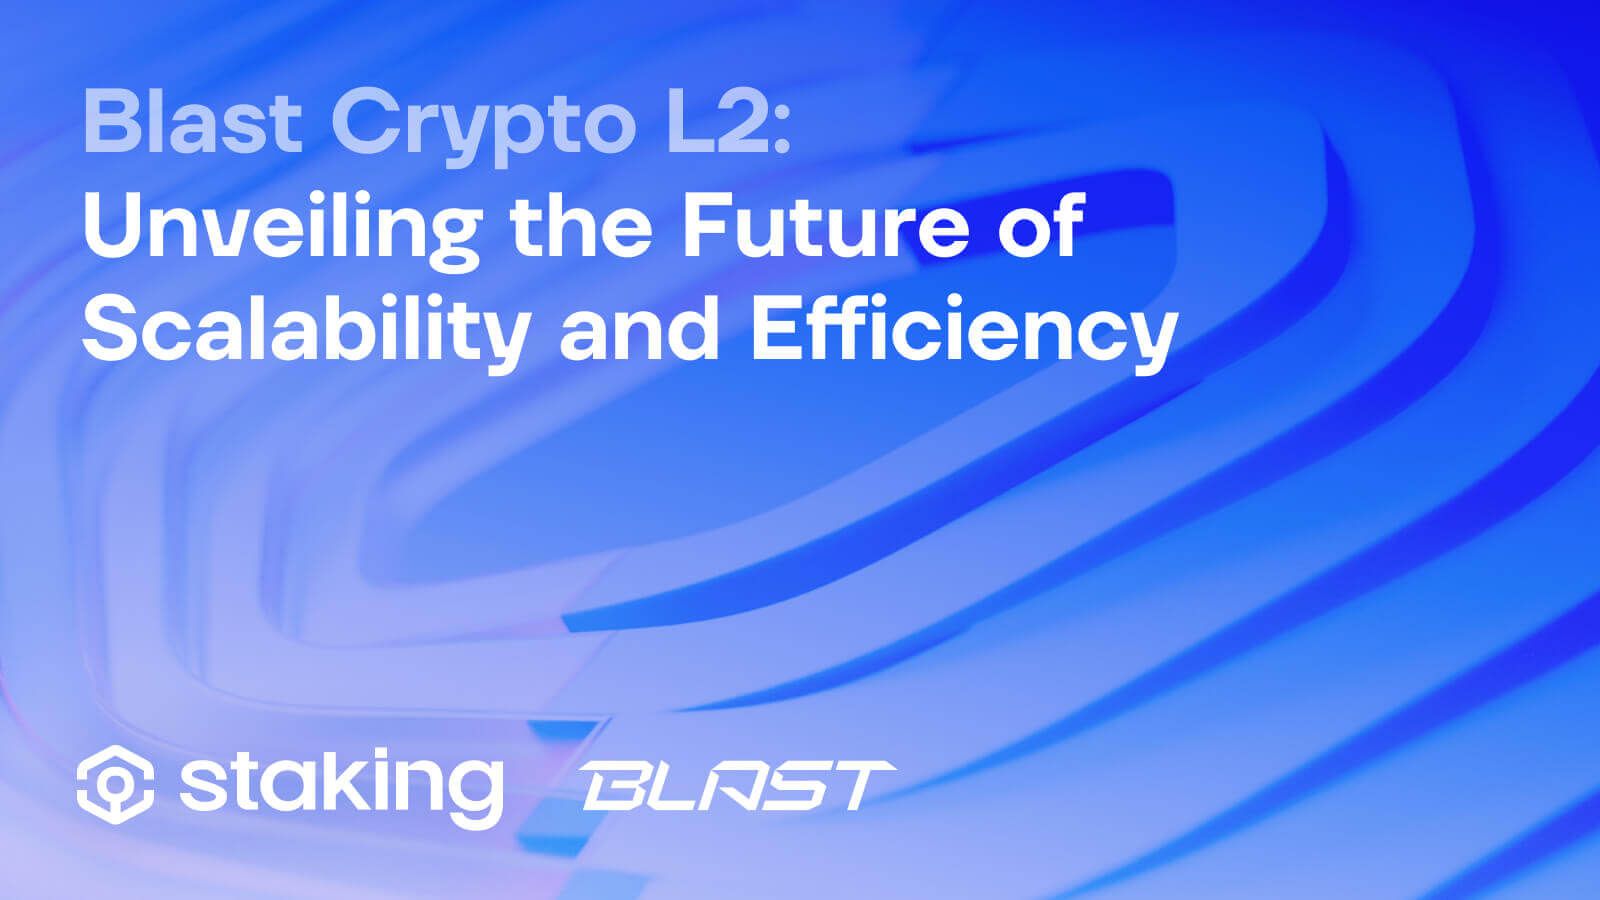 Blast Crypto L2: Unveiling the Future of Scalability and Efficiency